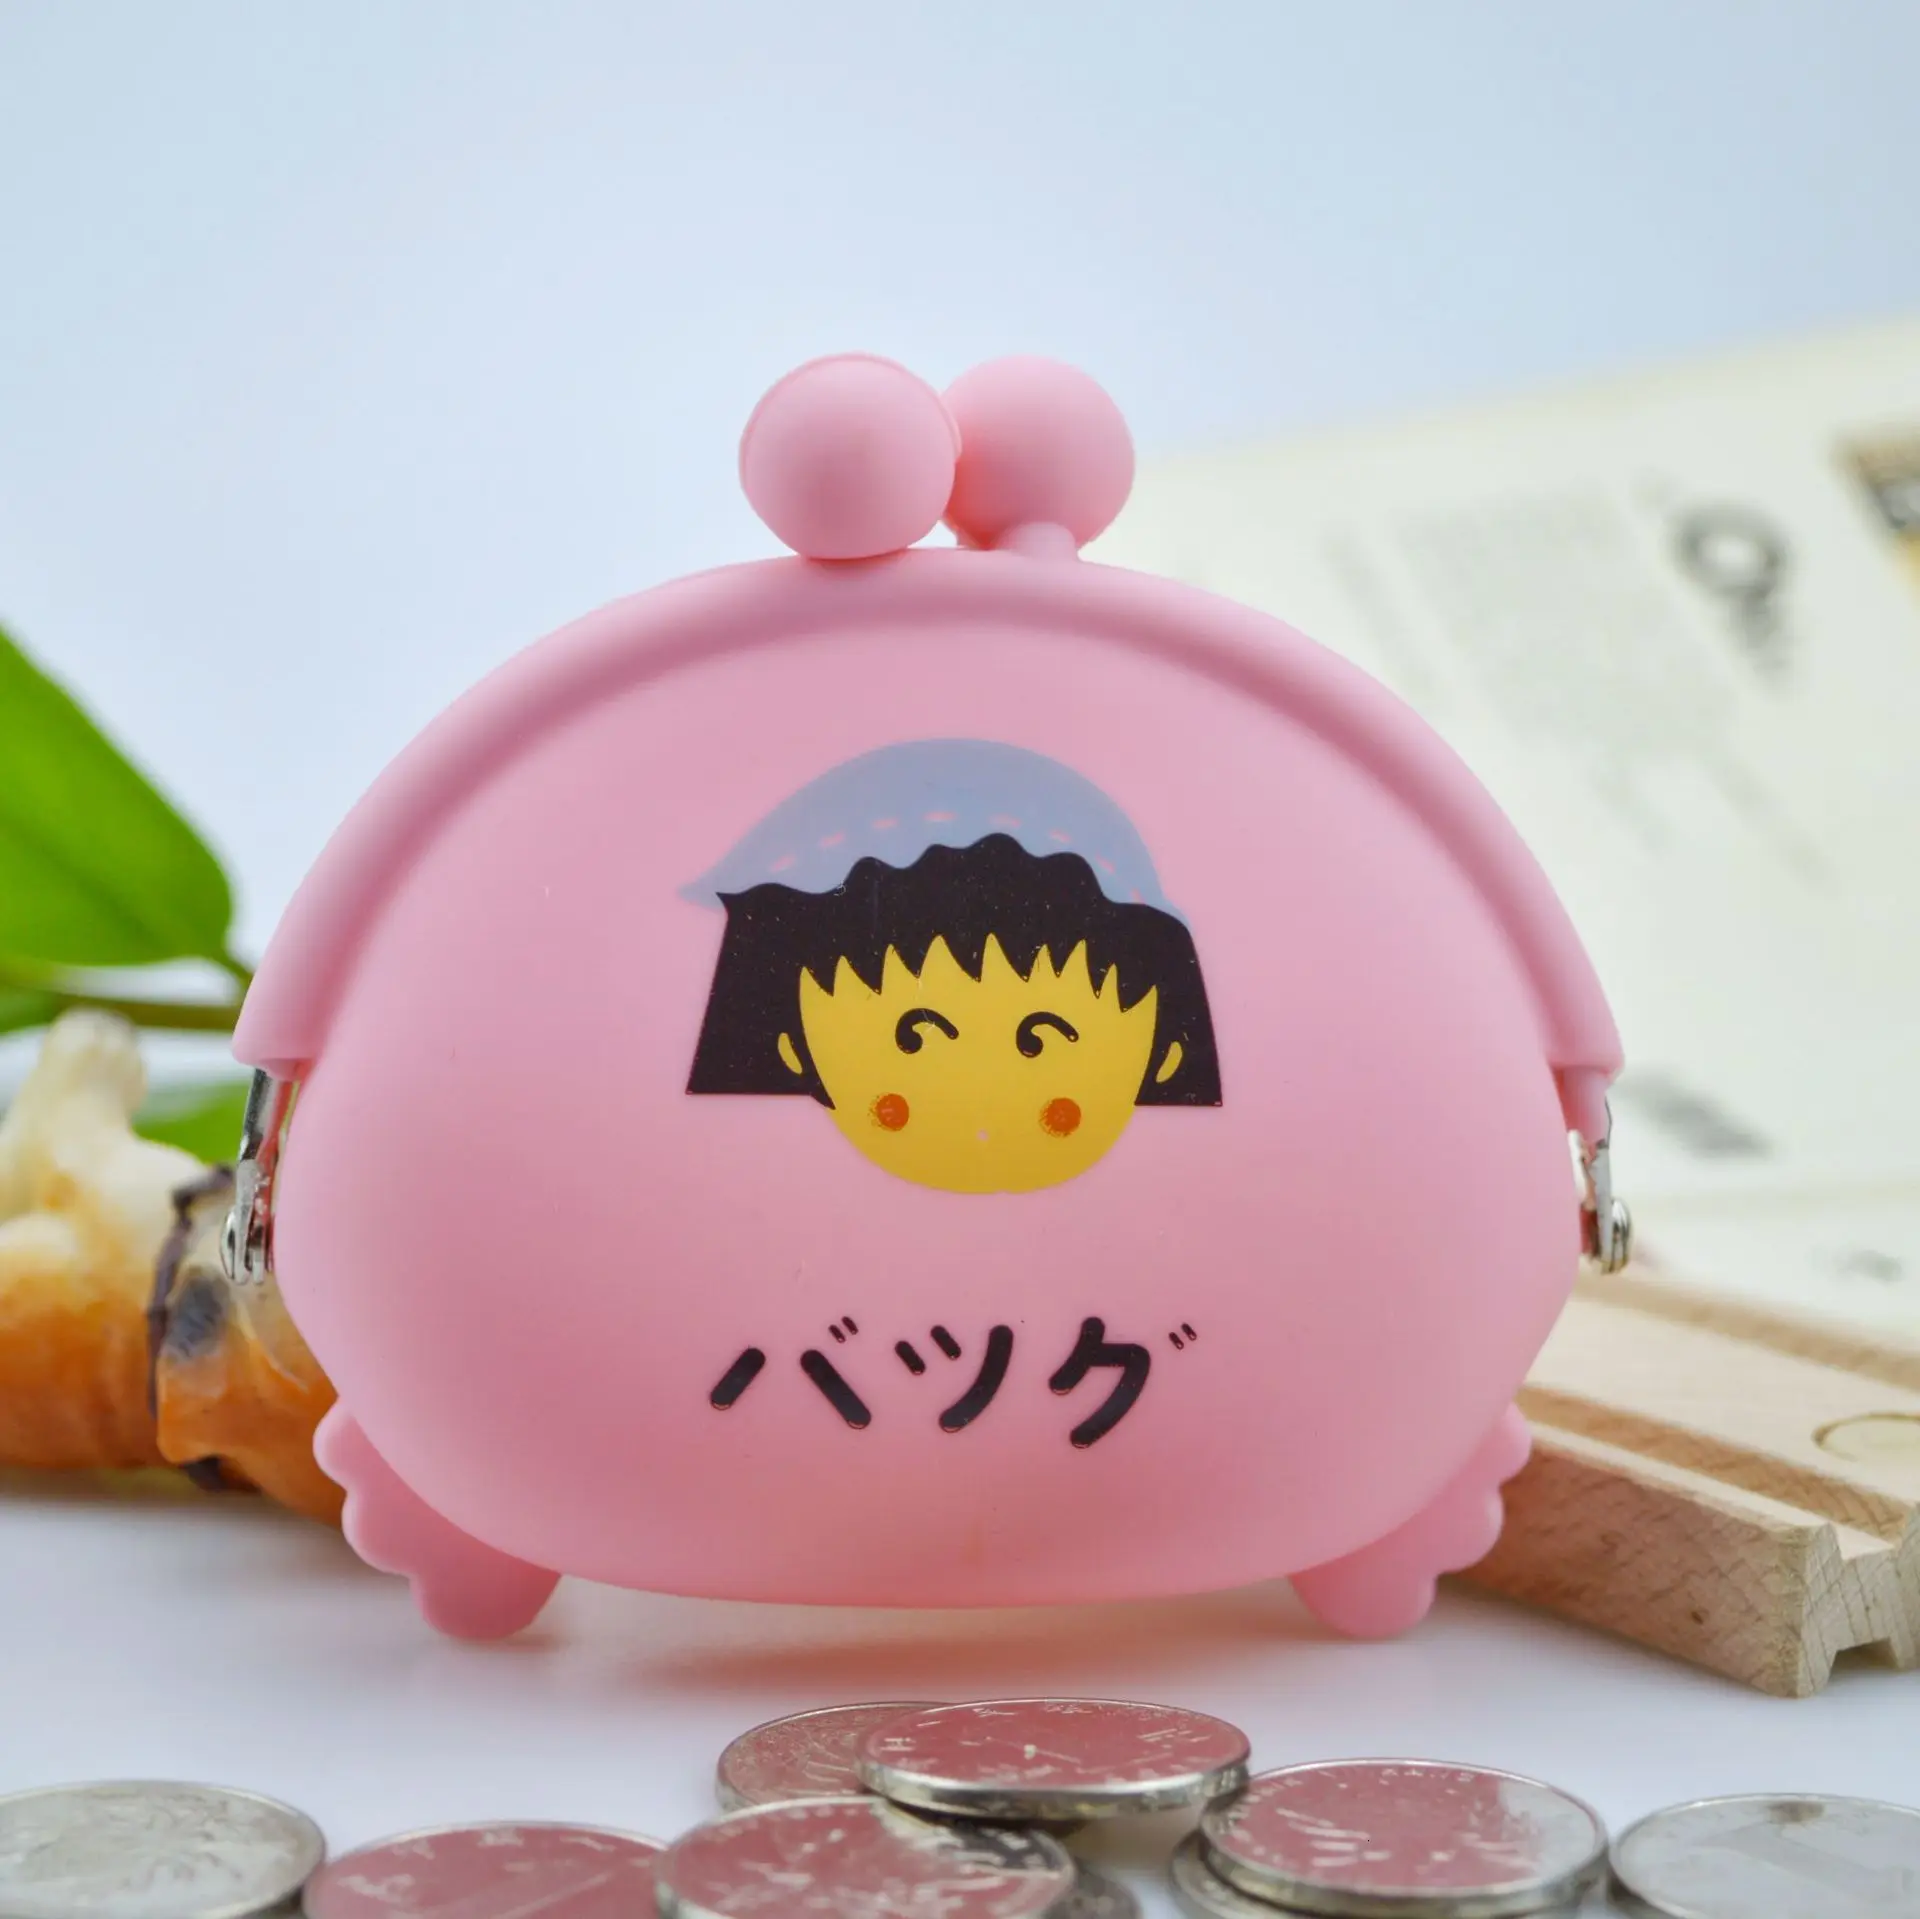 New Fashion Lovely Kawaii Candy Color Cartoon Animal Women Girls Wallet Multicolor Jelly Silicone Coin Bag Purse Kid Gift#EDS - Цвет: Pinkball